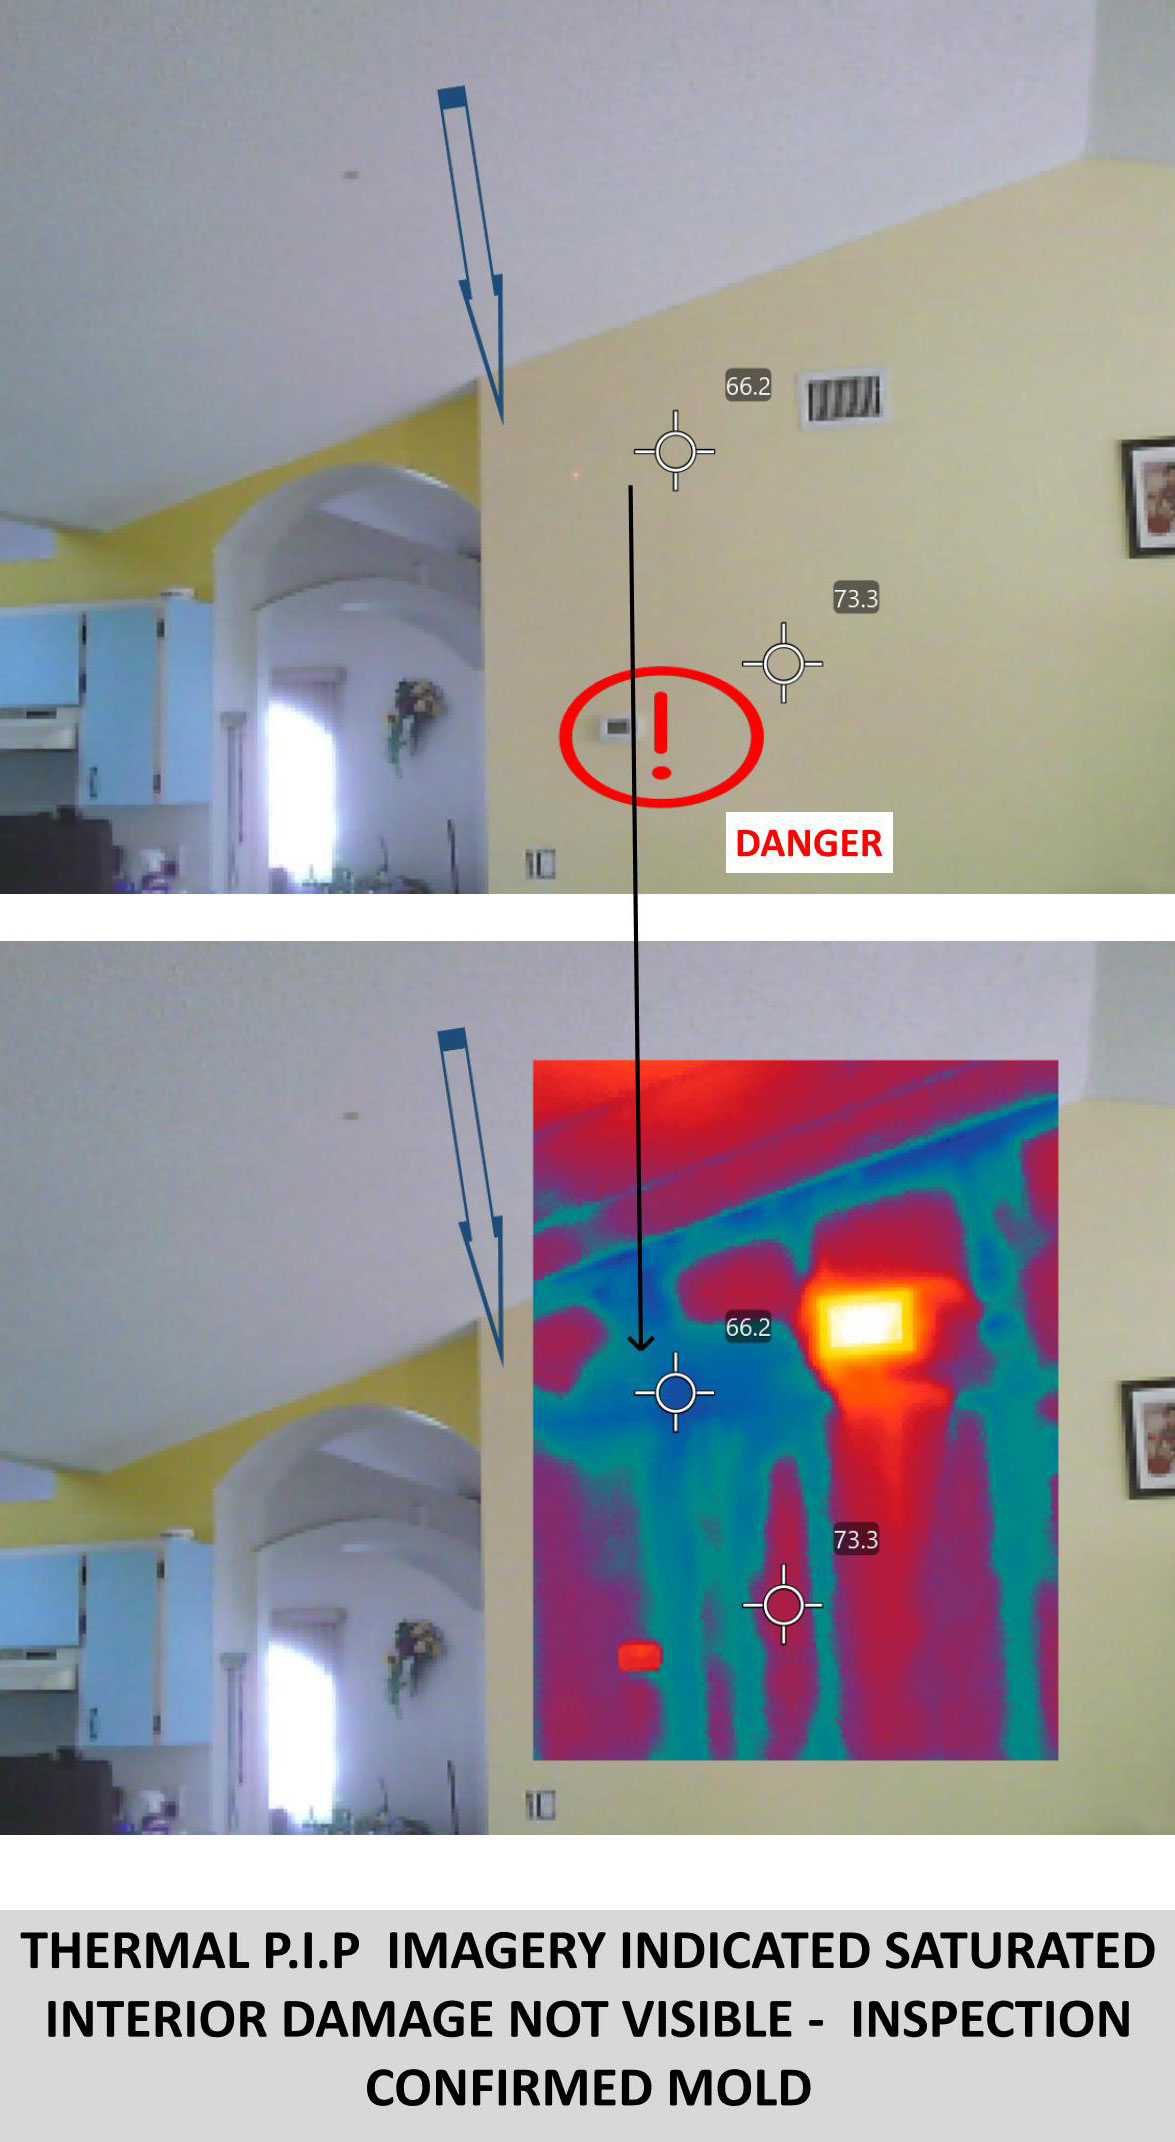 thermal P.I.P imagery indicated saturated itnerior damage not visble - inspection confirmed mold